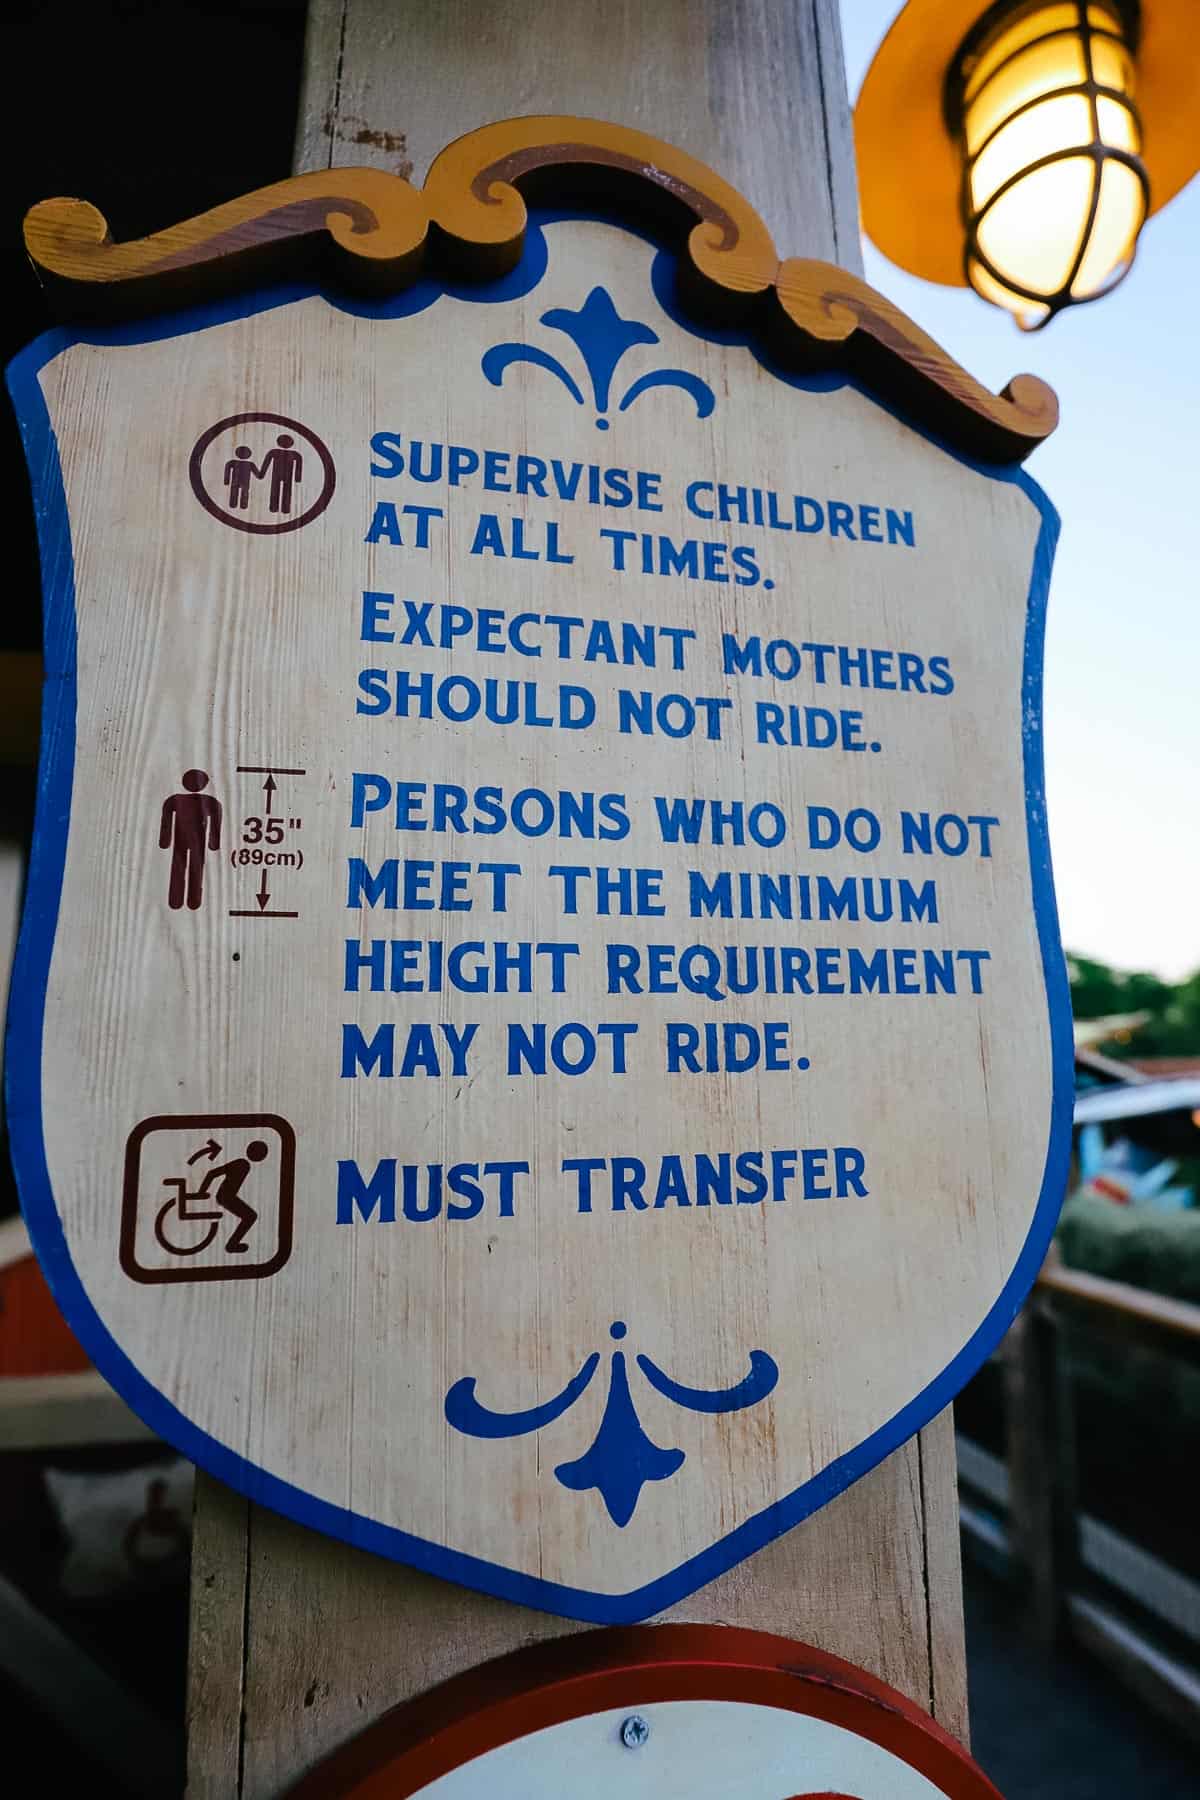 The listed height restriction of 35" for guests riding the Barnstormer.